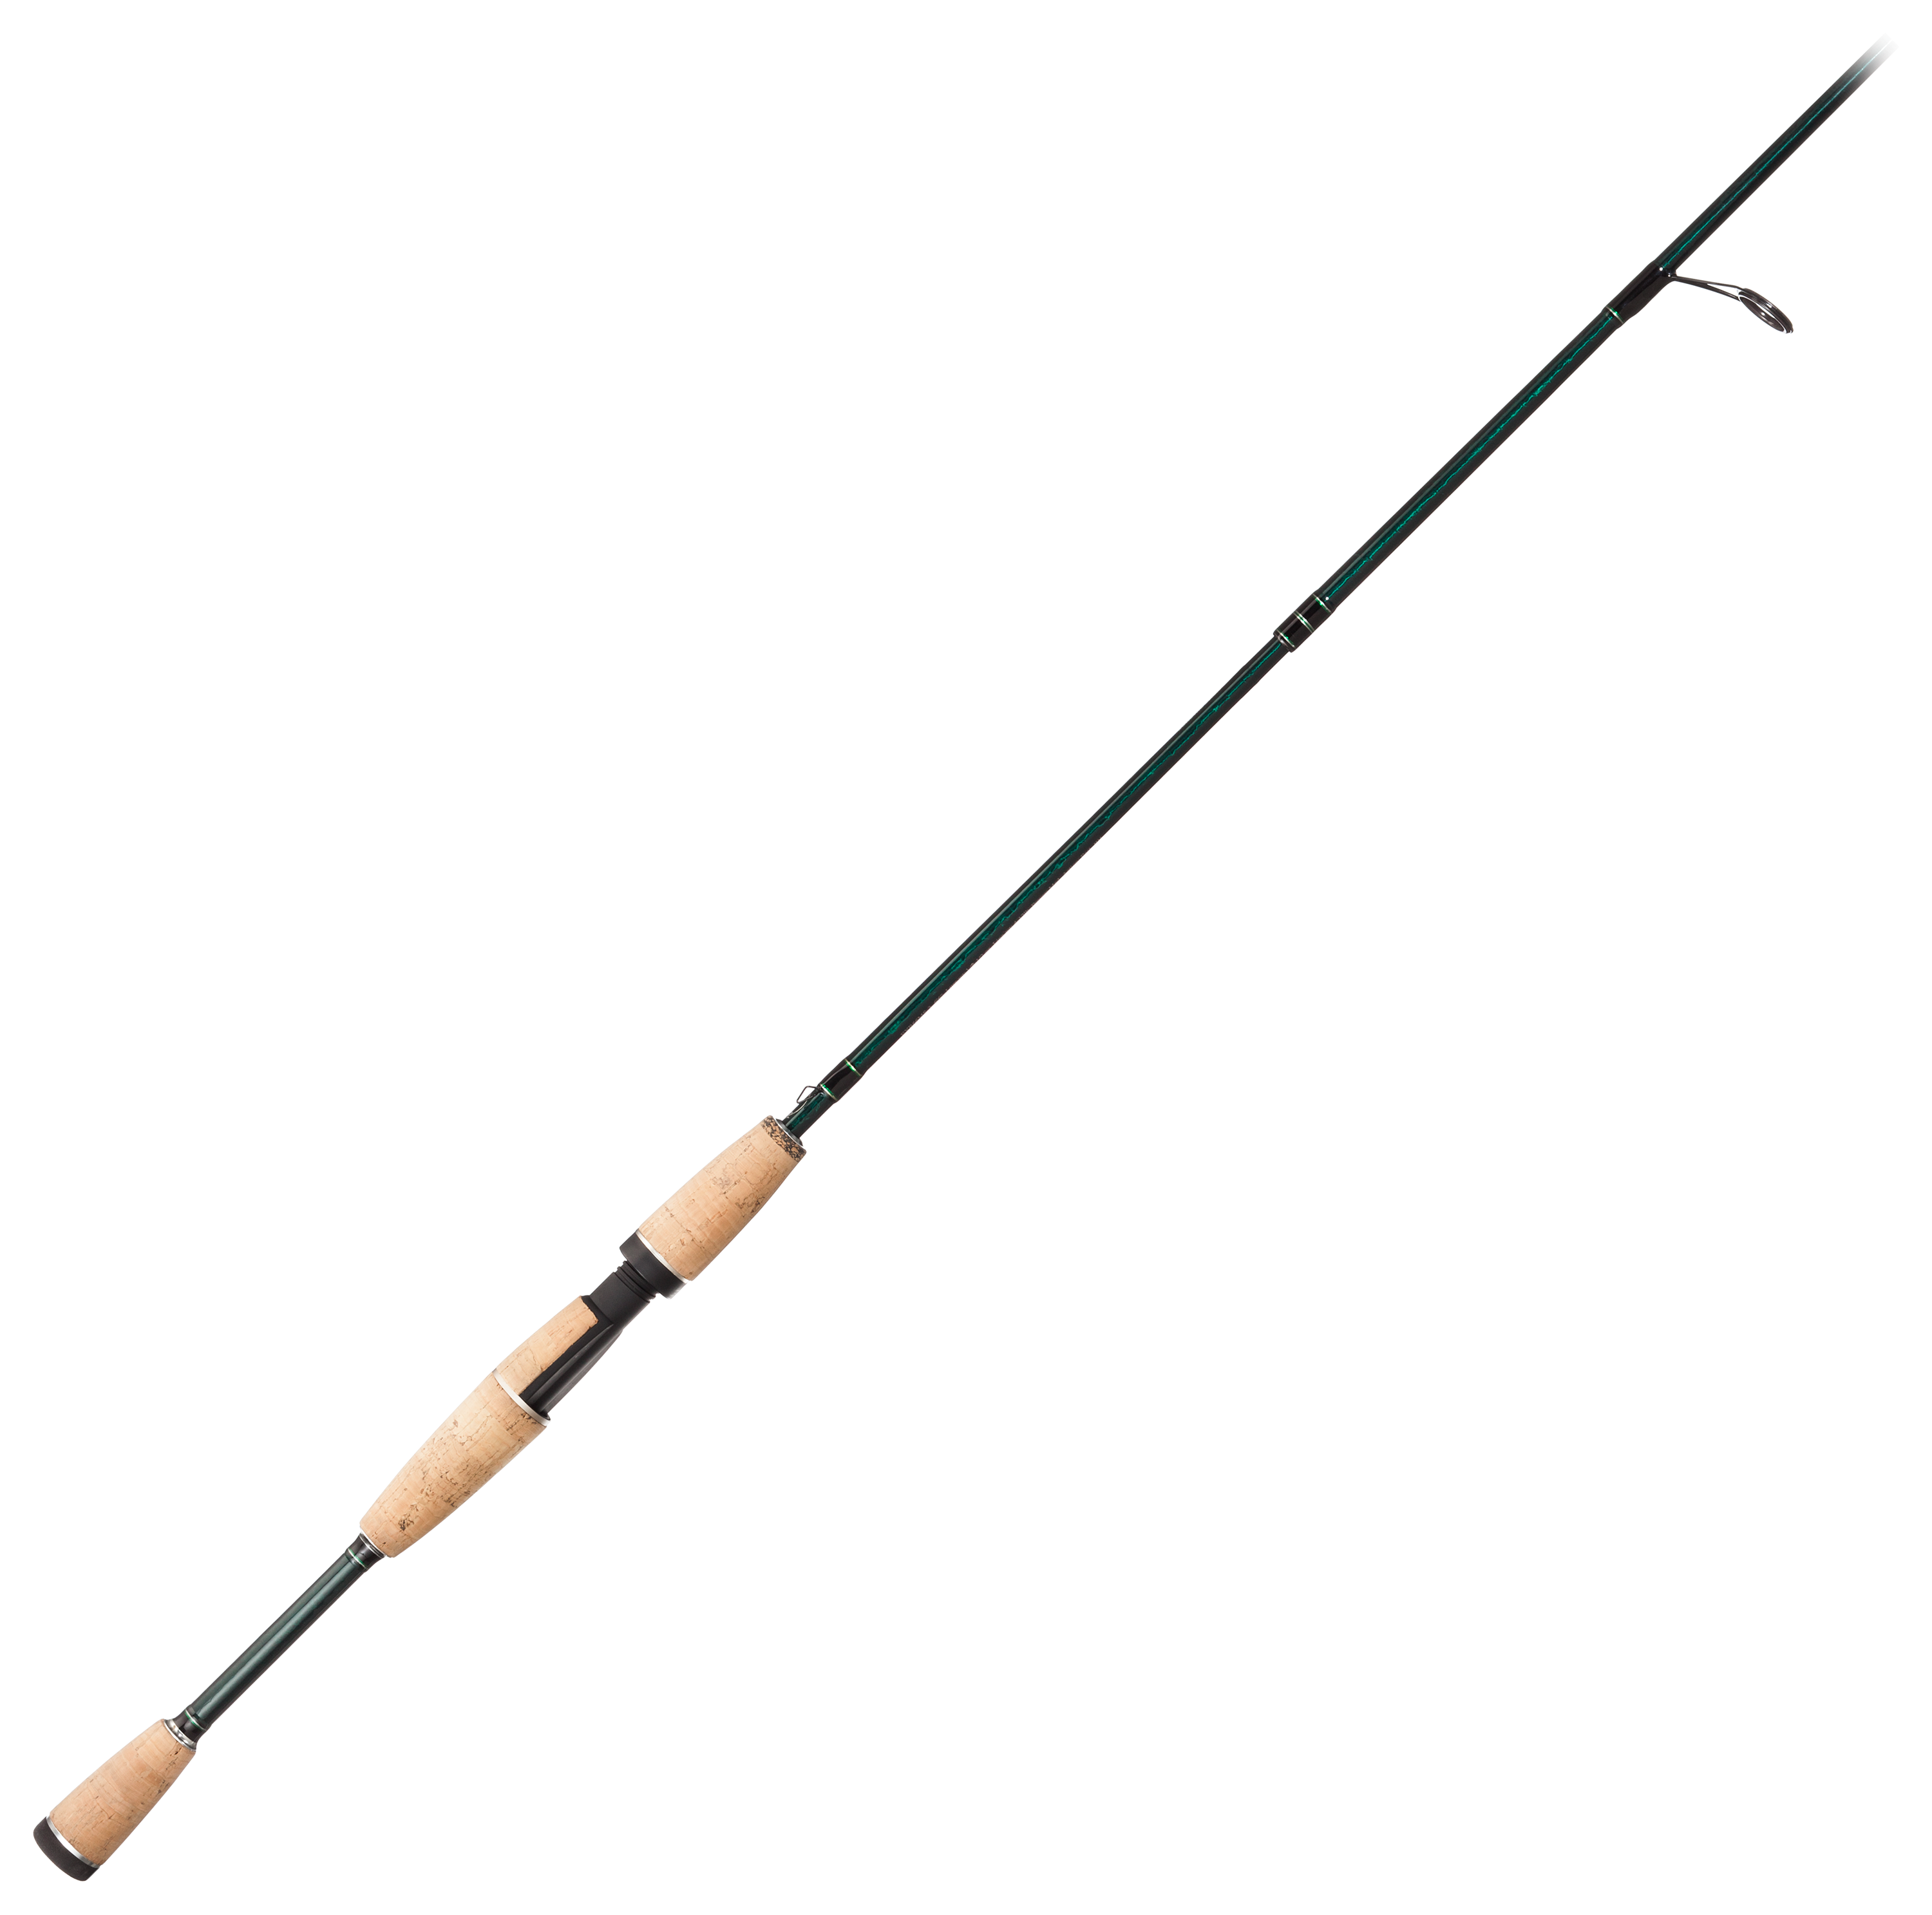 Bass Pro Shops Extreme 3-Piece Travel Spinning Rod